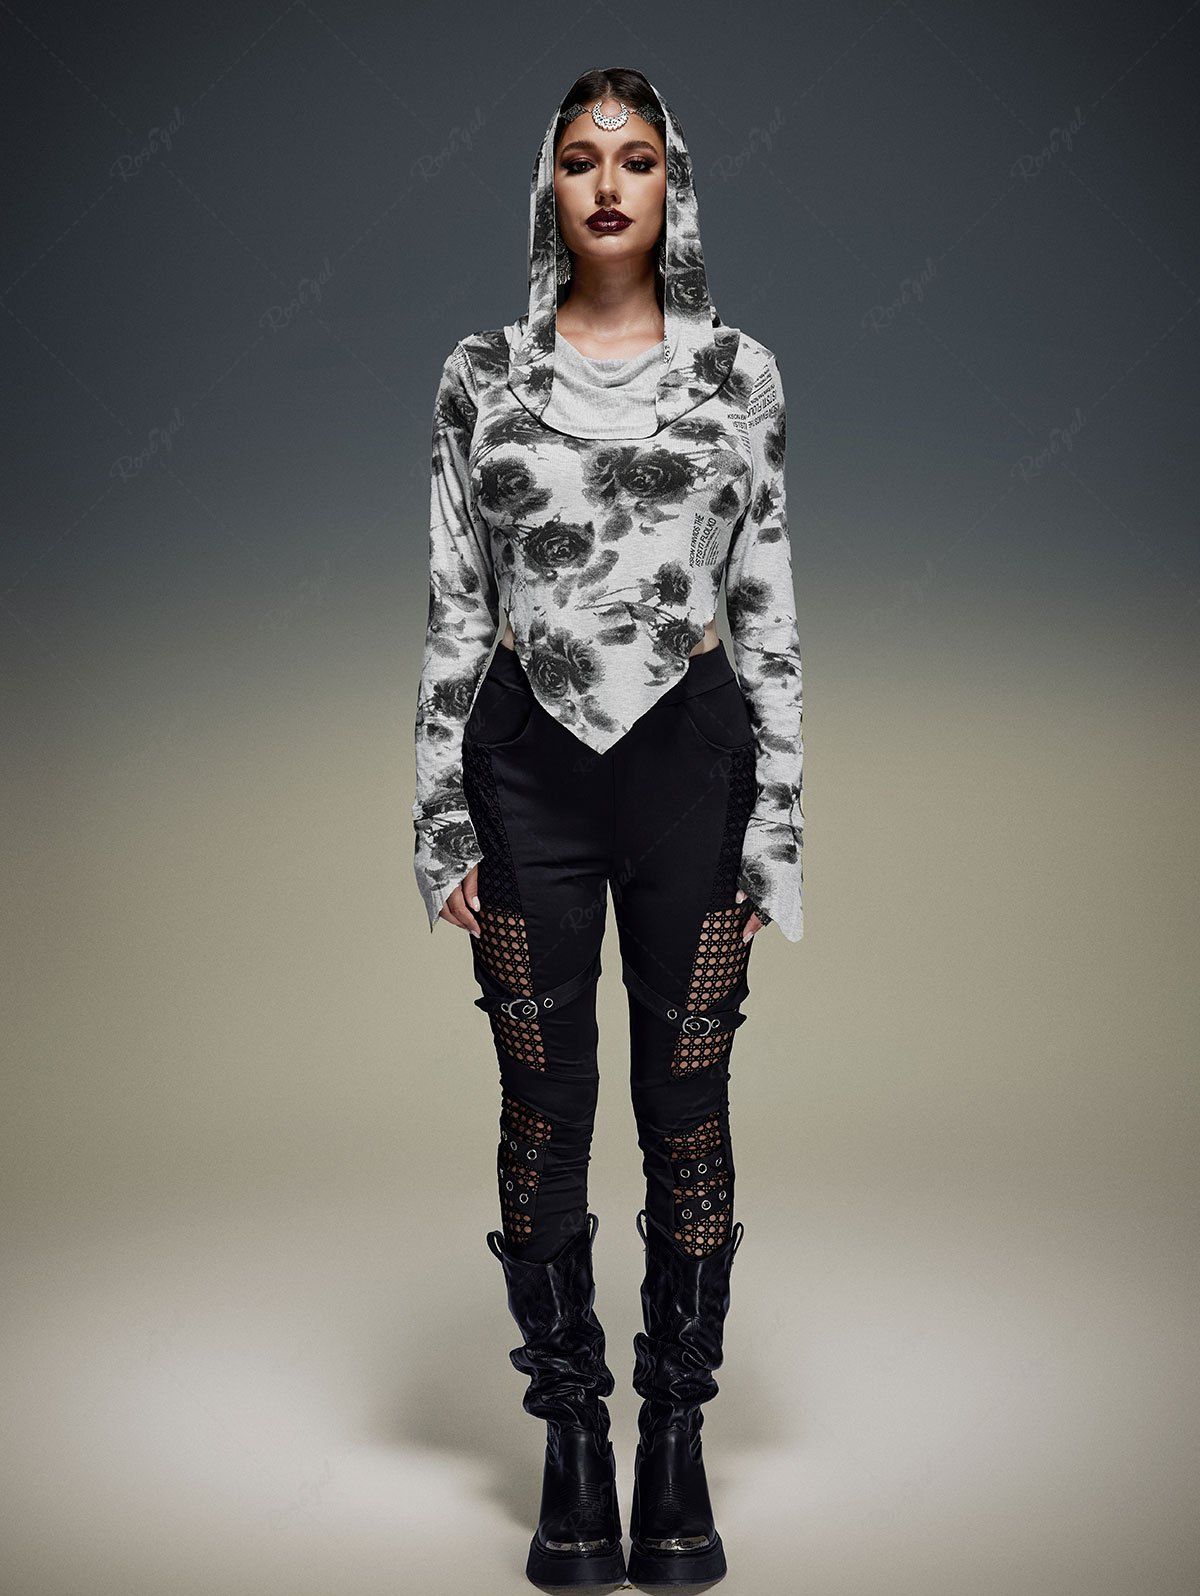 Gothic Distressed Floral Print Asymmetric Hooded Long Sleeves T-shirt